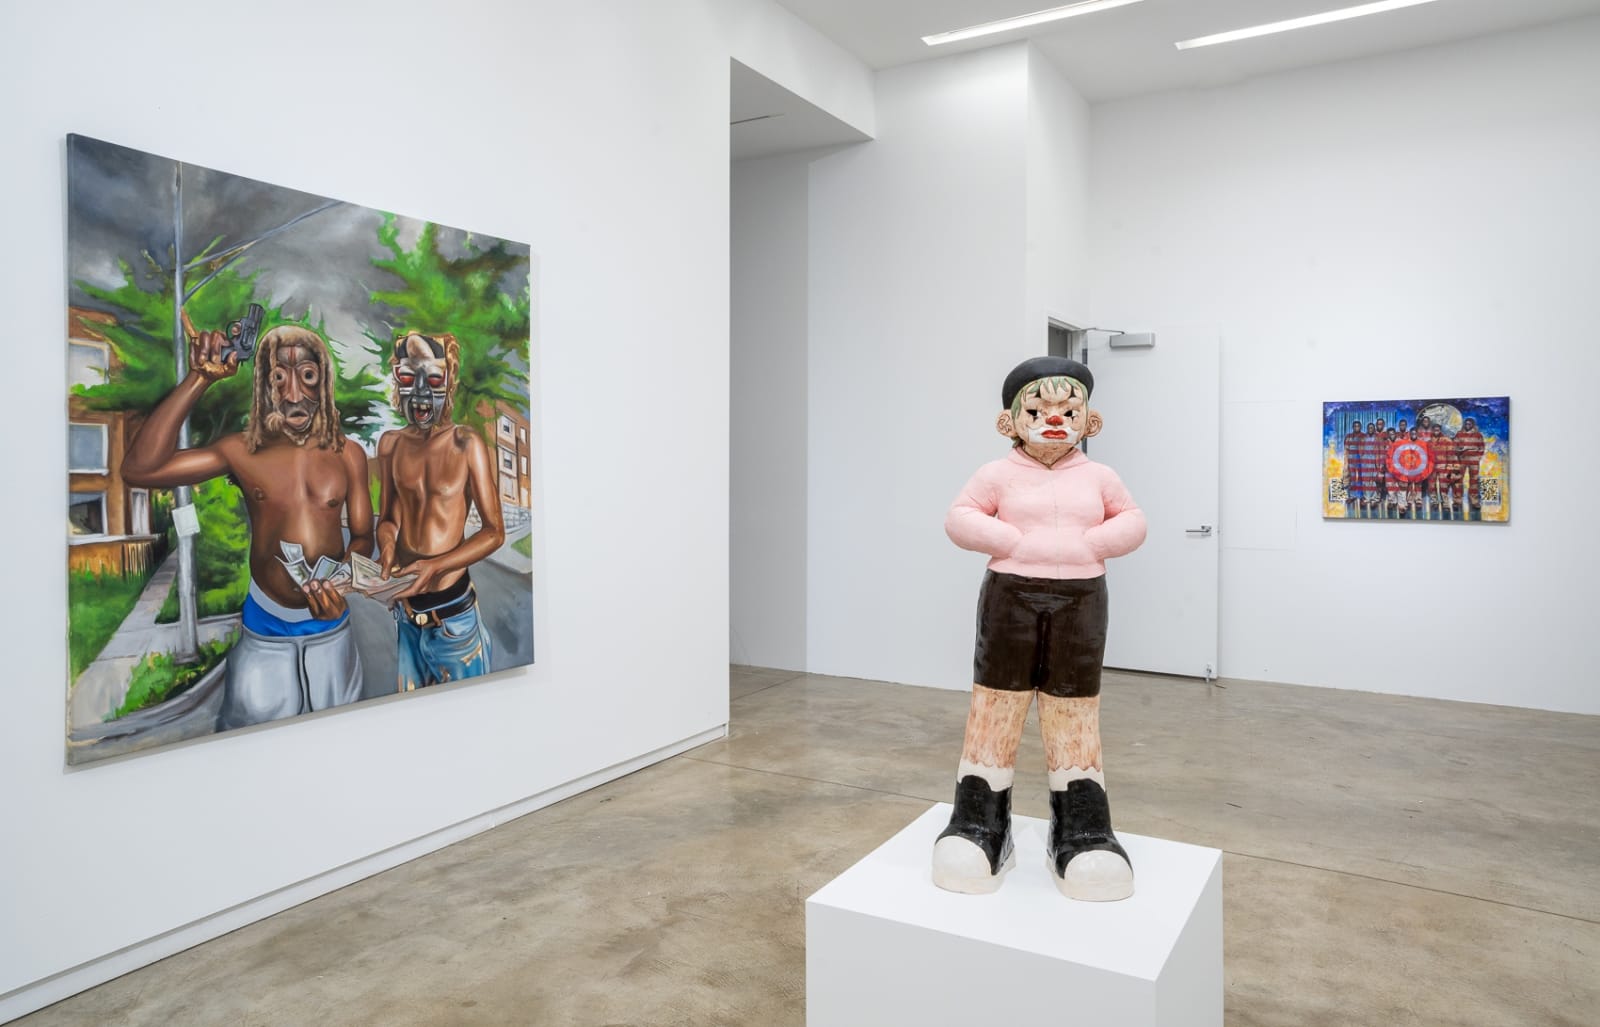 Skin + Masks: Decolonizing Art Beyond the Politics of Visibility curated by Vic Mensa